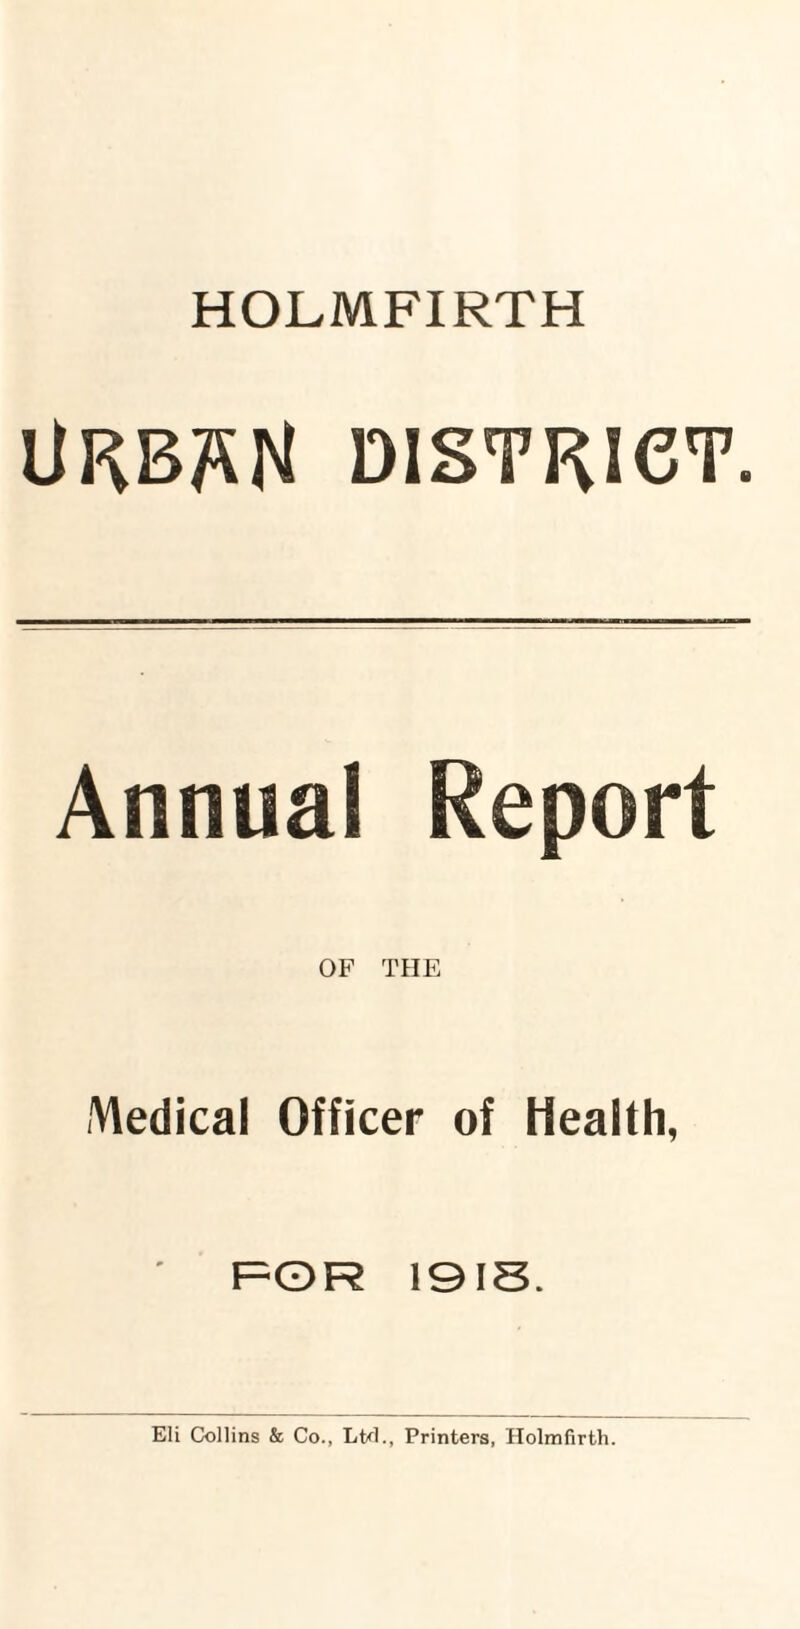 HOLMFIRTH llRBSN DISTRICT. Annual Report OF THE Medical Officer of Health, FOR 19 IS. Eli Collins & Co., Ltd., Printers, Holmfirth.